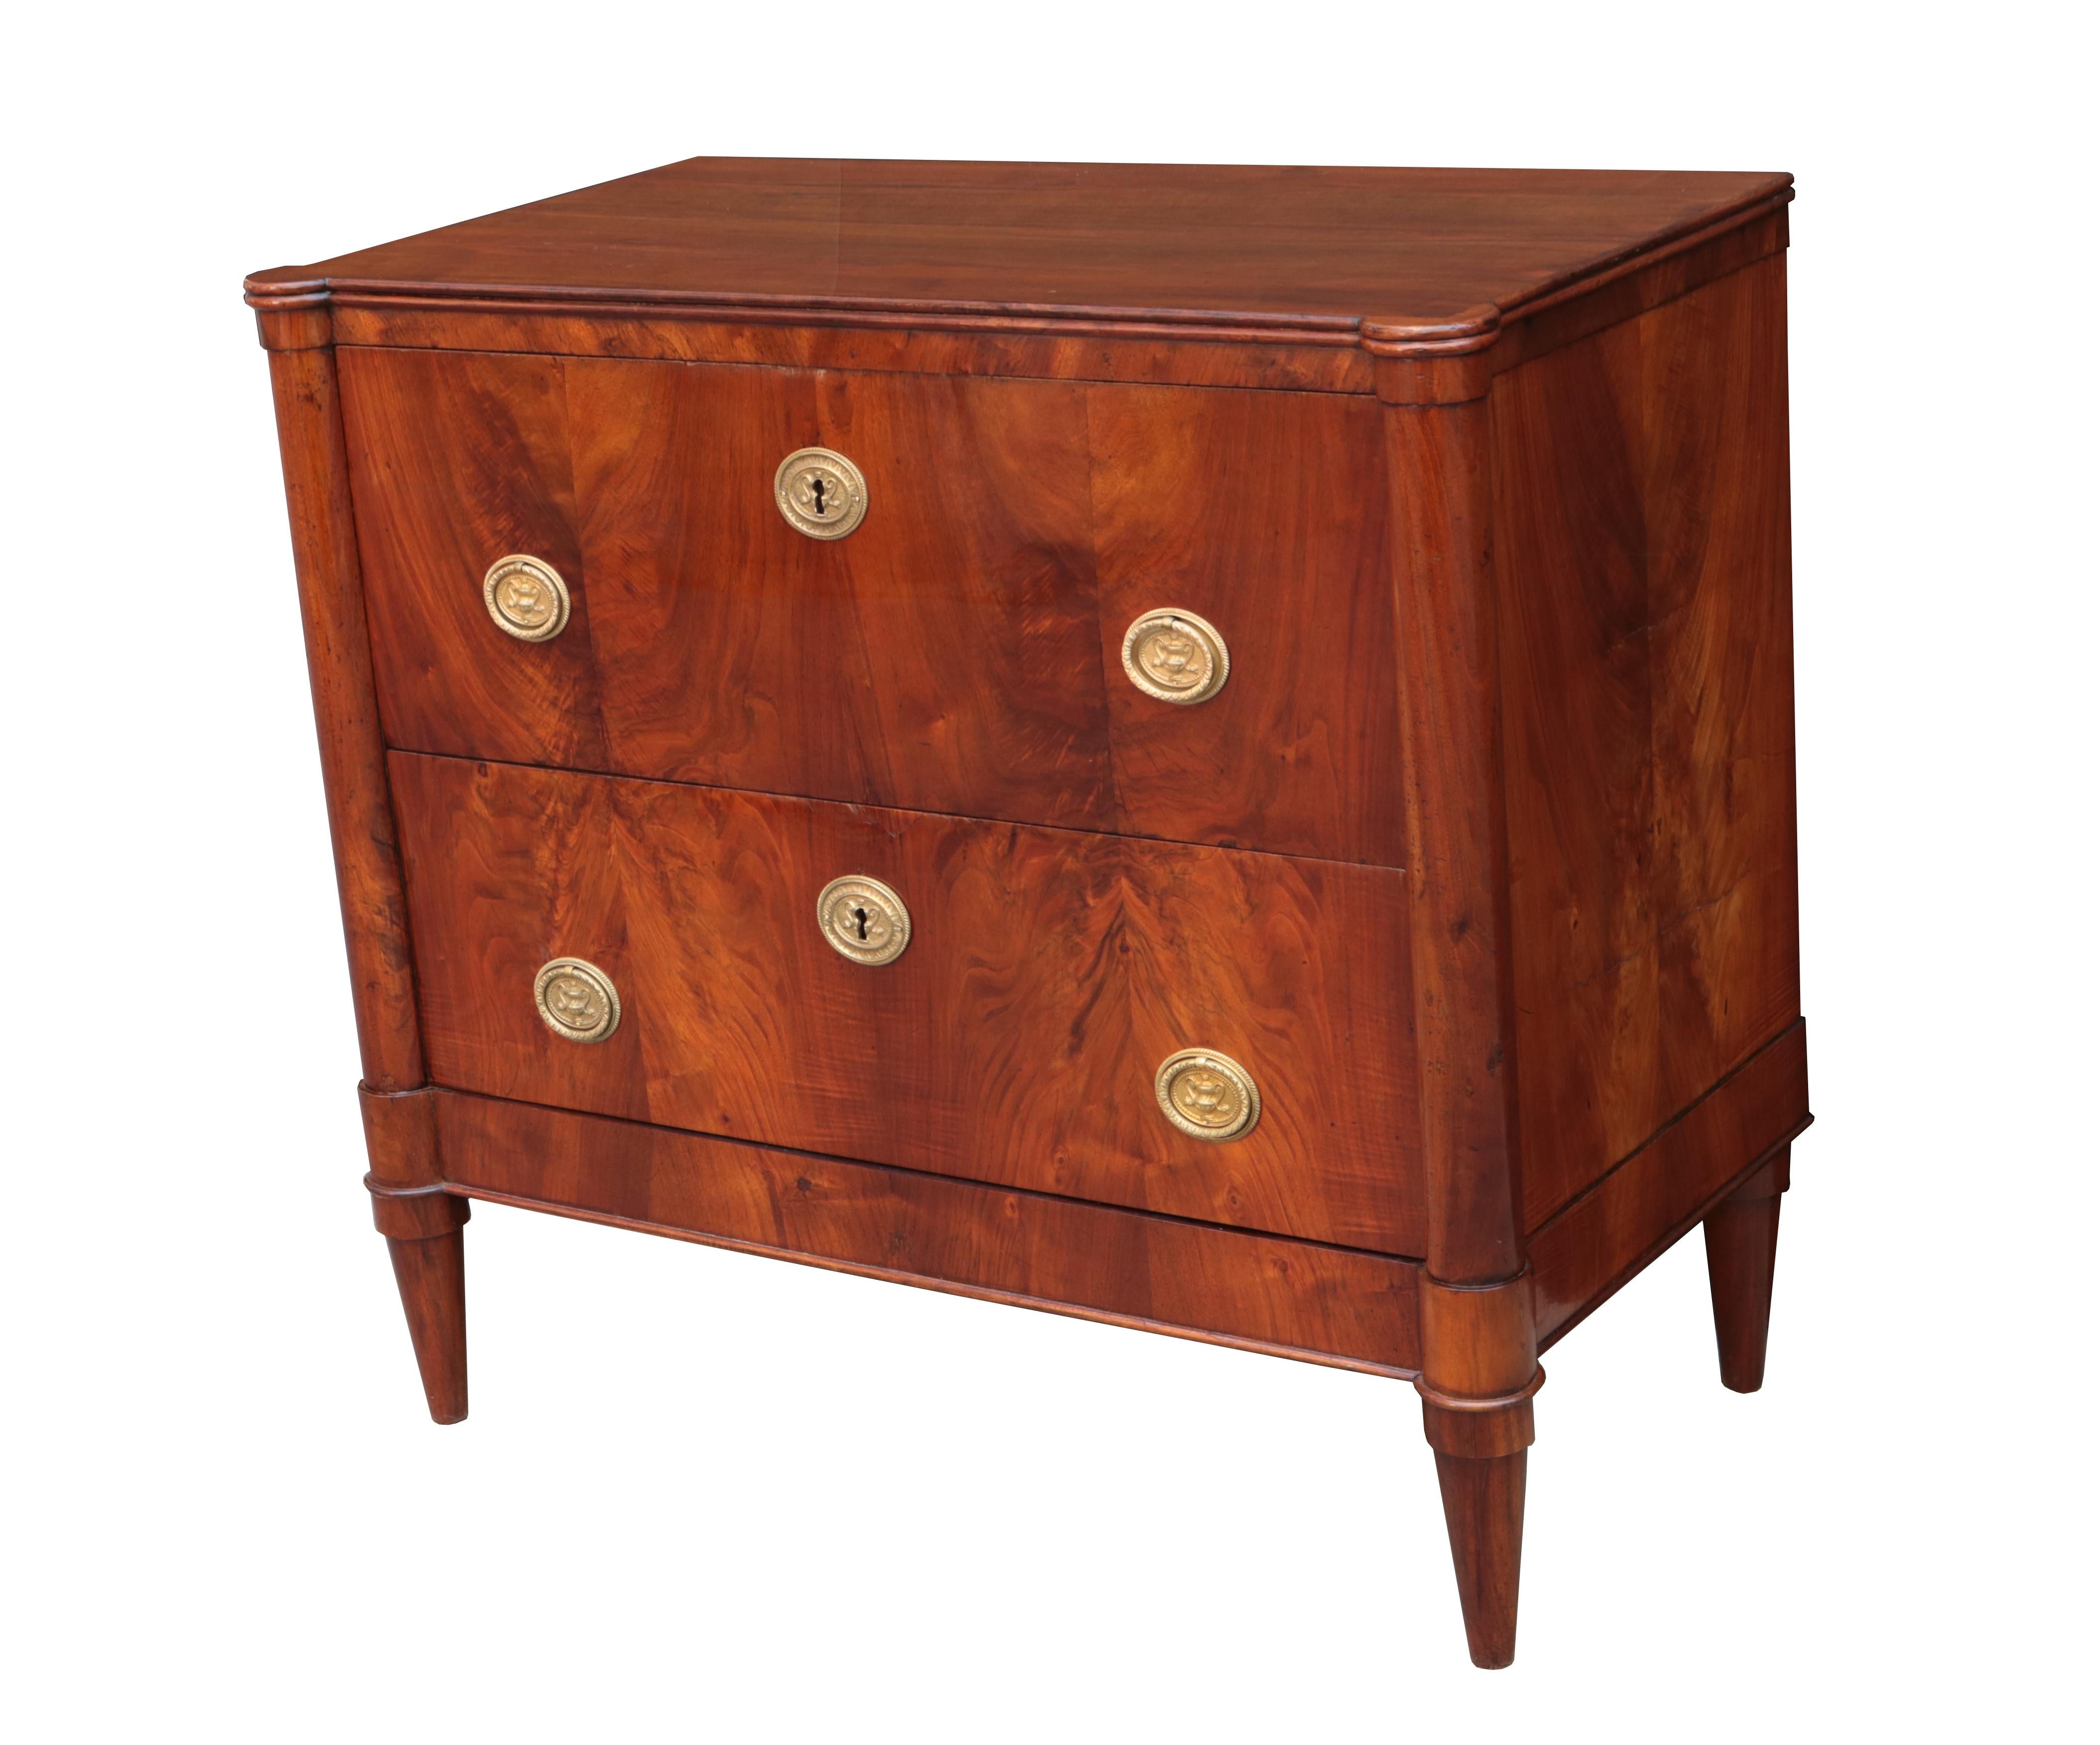 A pair of Italian Neoclassical style bedside chests.
Walnut with patinated brass pulls and escutcheons.
 